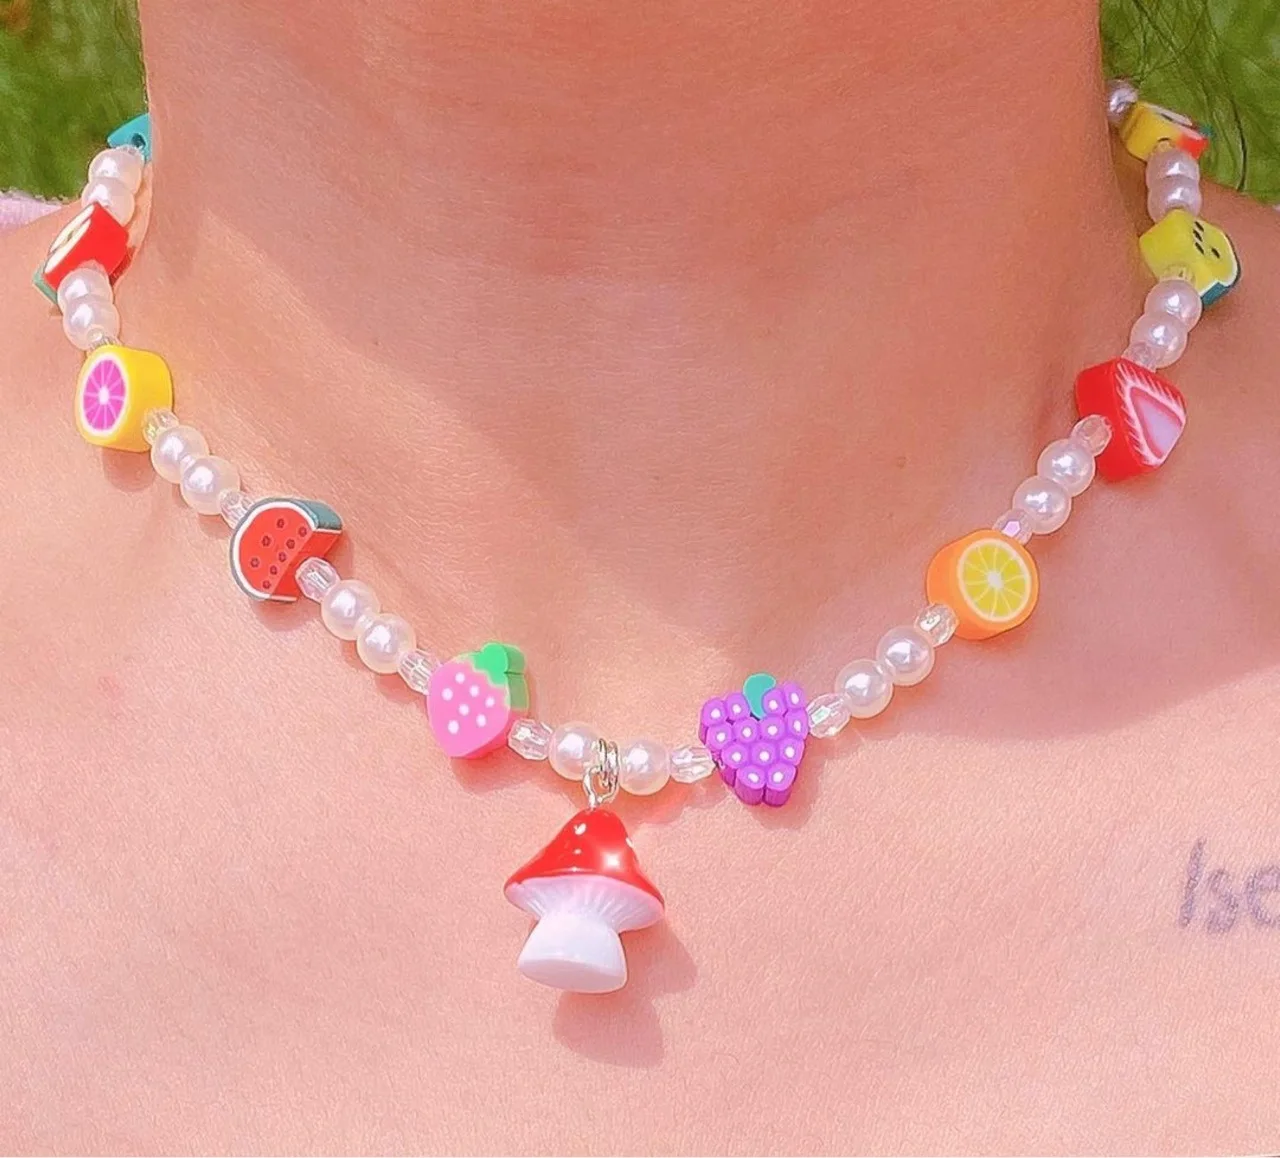 

Funny Cute Mushroom Pendant Necklaces for Women Neck Chains Jewelry Harajuku Multicolor Clay Fruit Melon Pearl Chain Chokers New